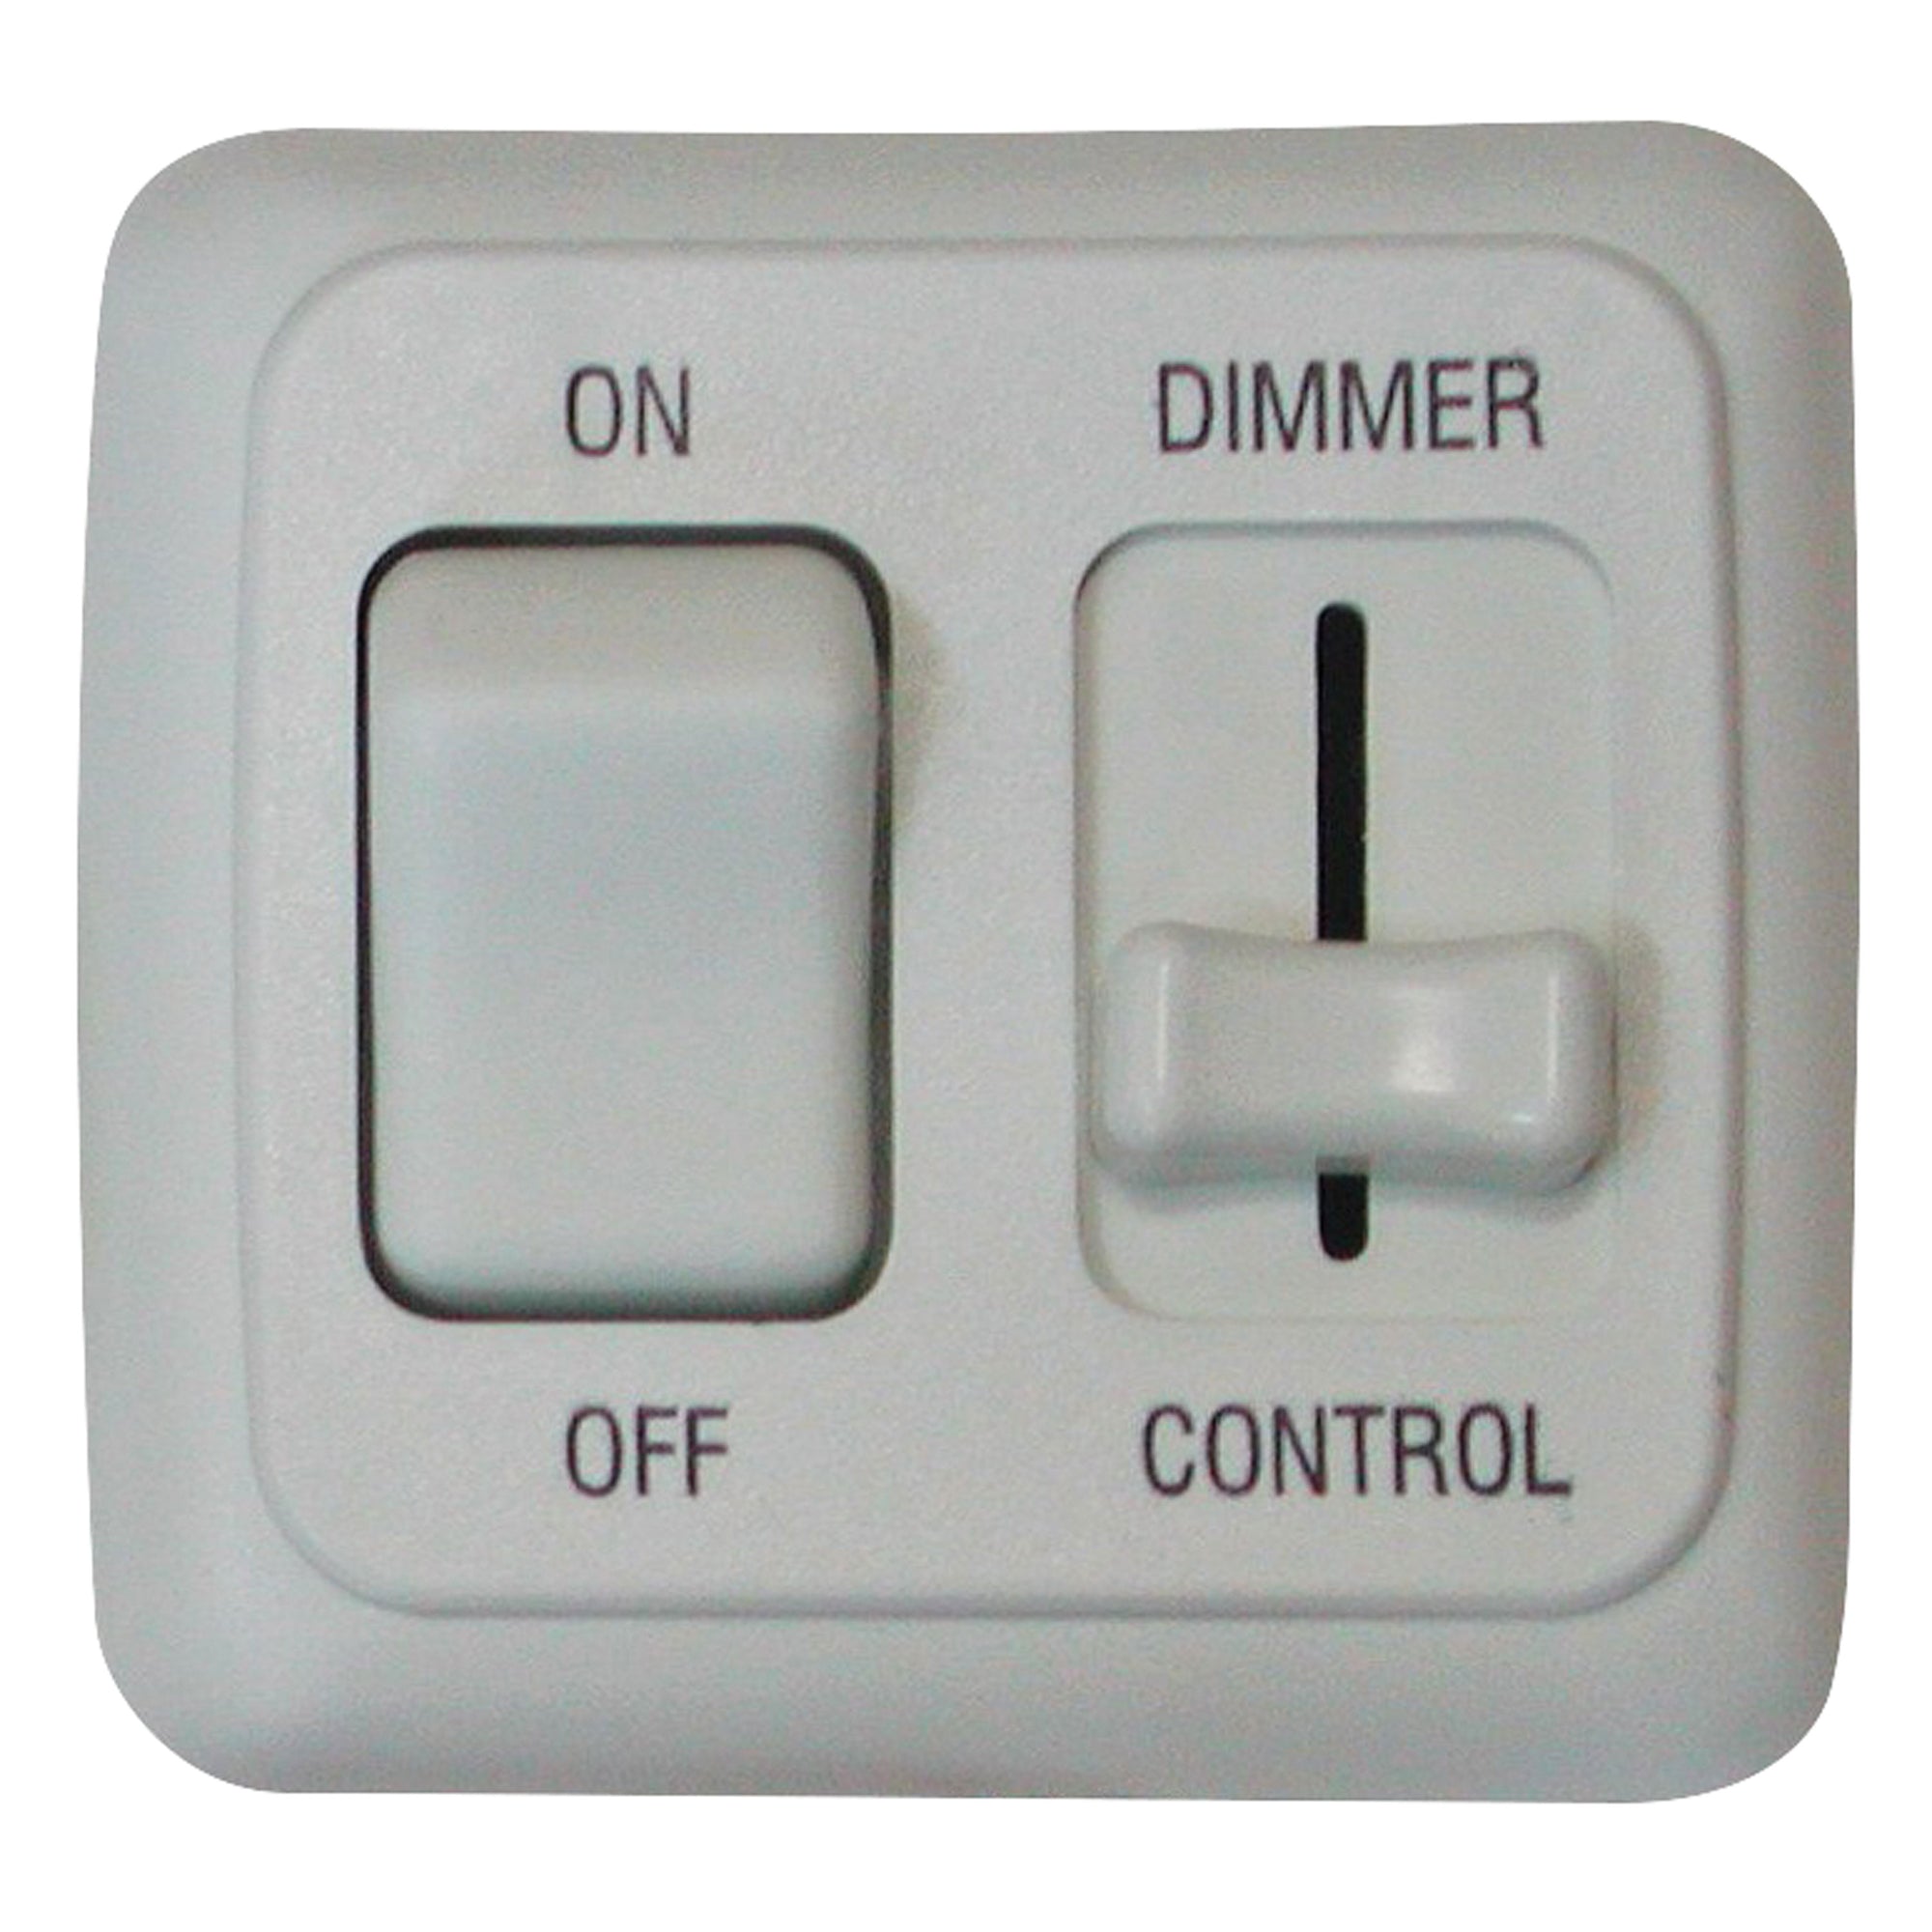 Diamond Group by Valterra DGLD01VP LED Dimmer with On/Off Switch - White